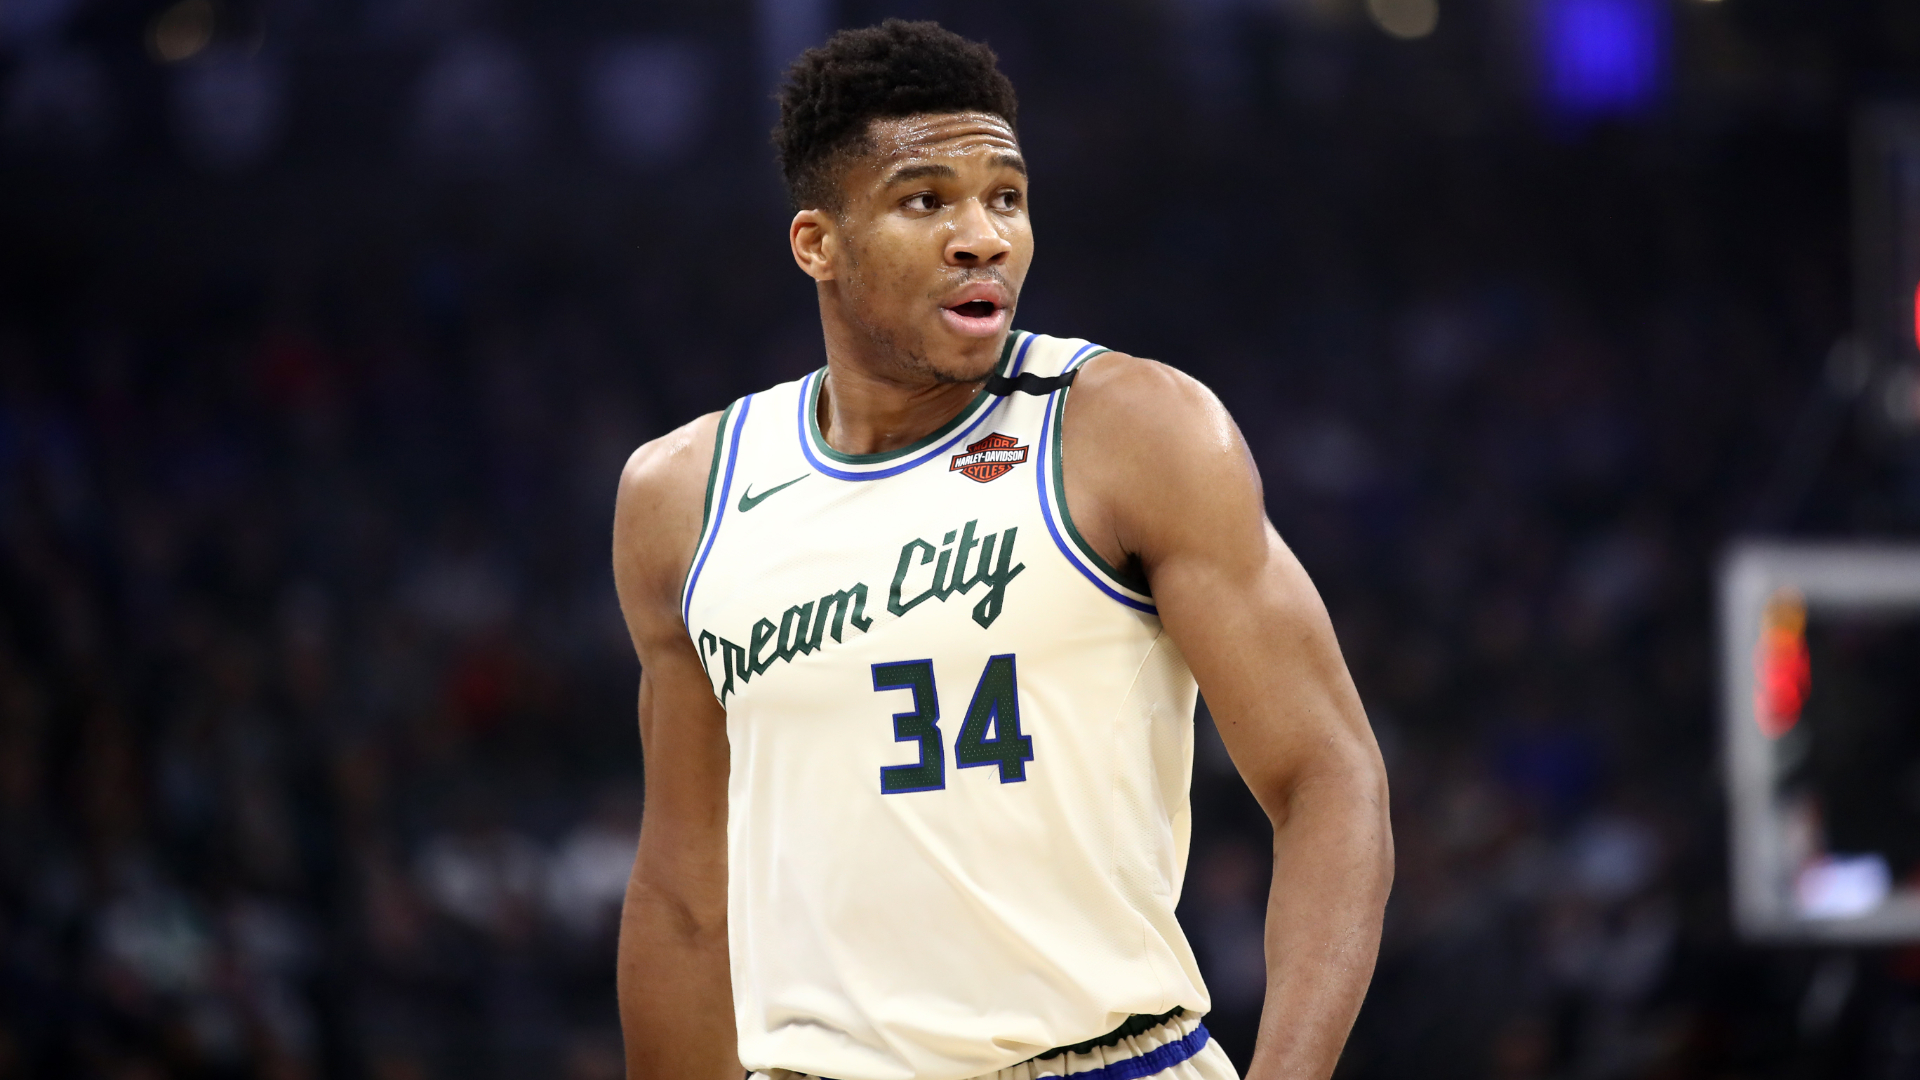 NBA star Giannis Antetokounmpo reveals his support for Arsenal ...